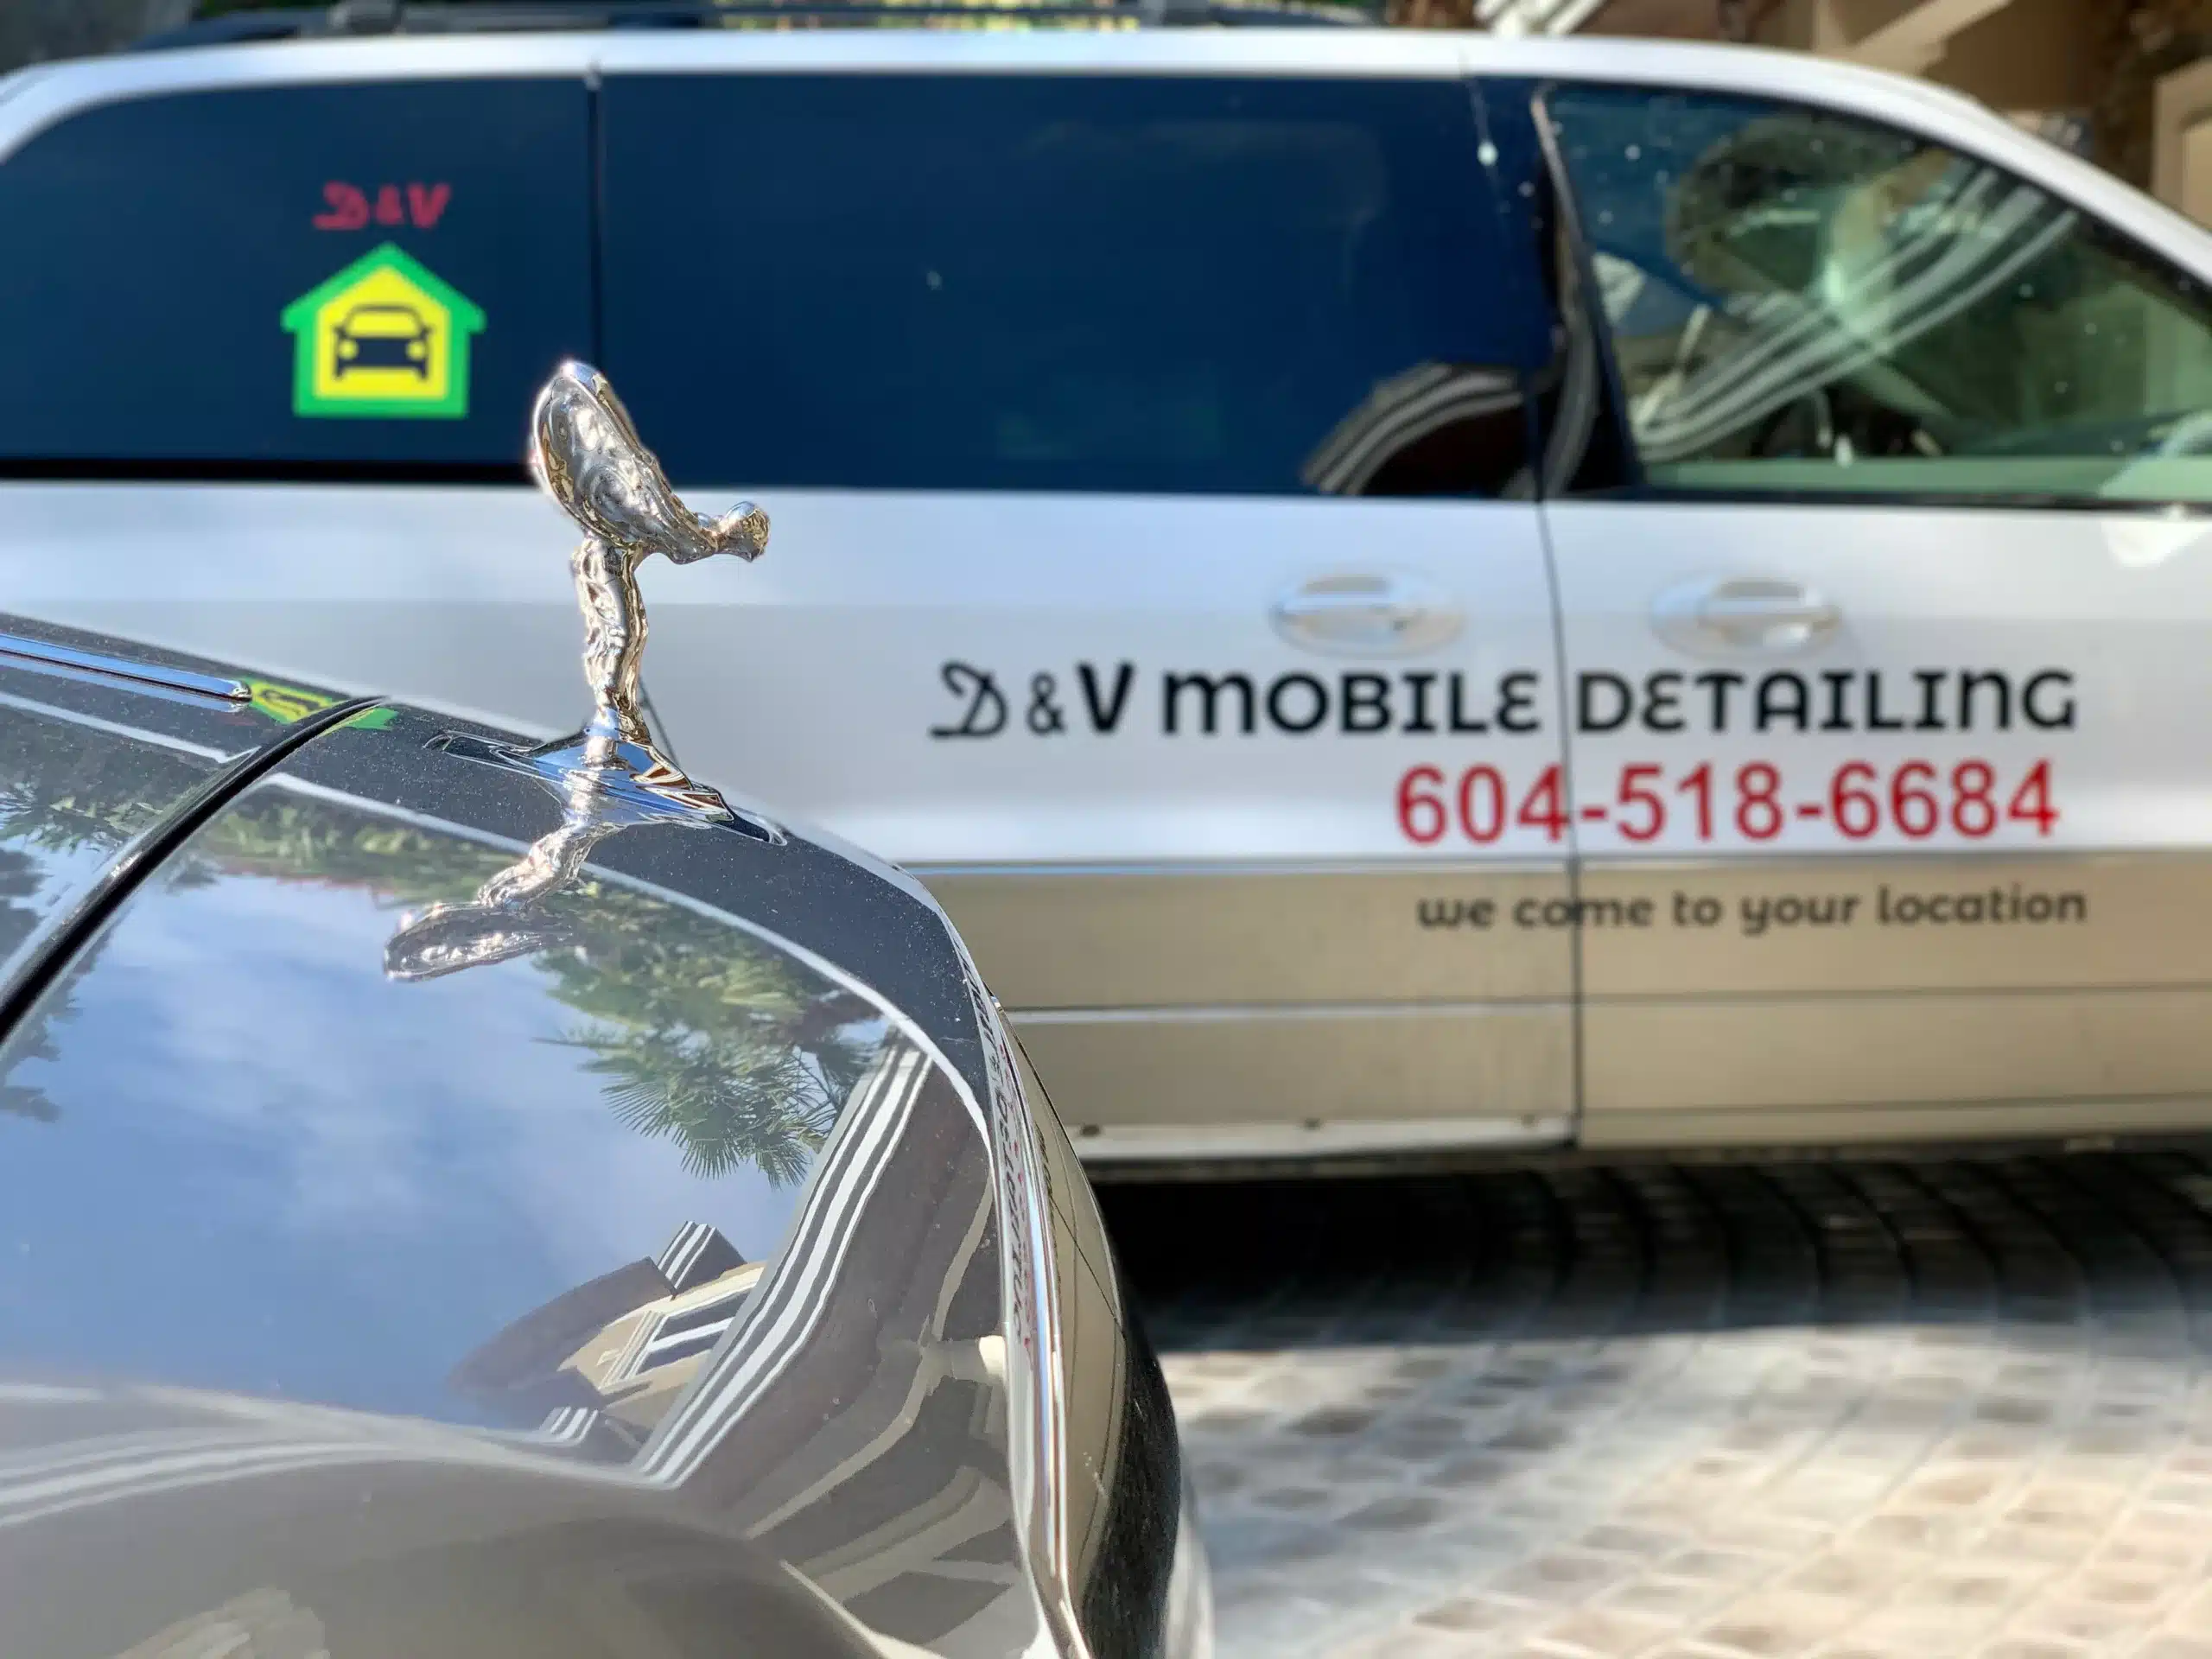 Mobile MotorCycle Detailing Services by D&V Mobile Auto.